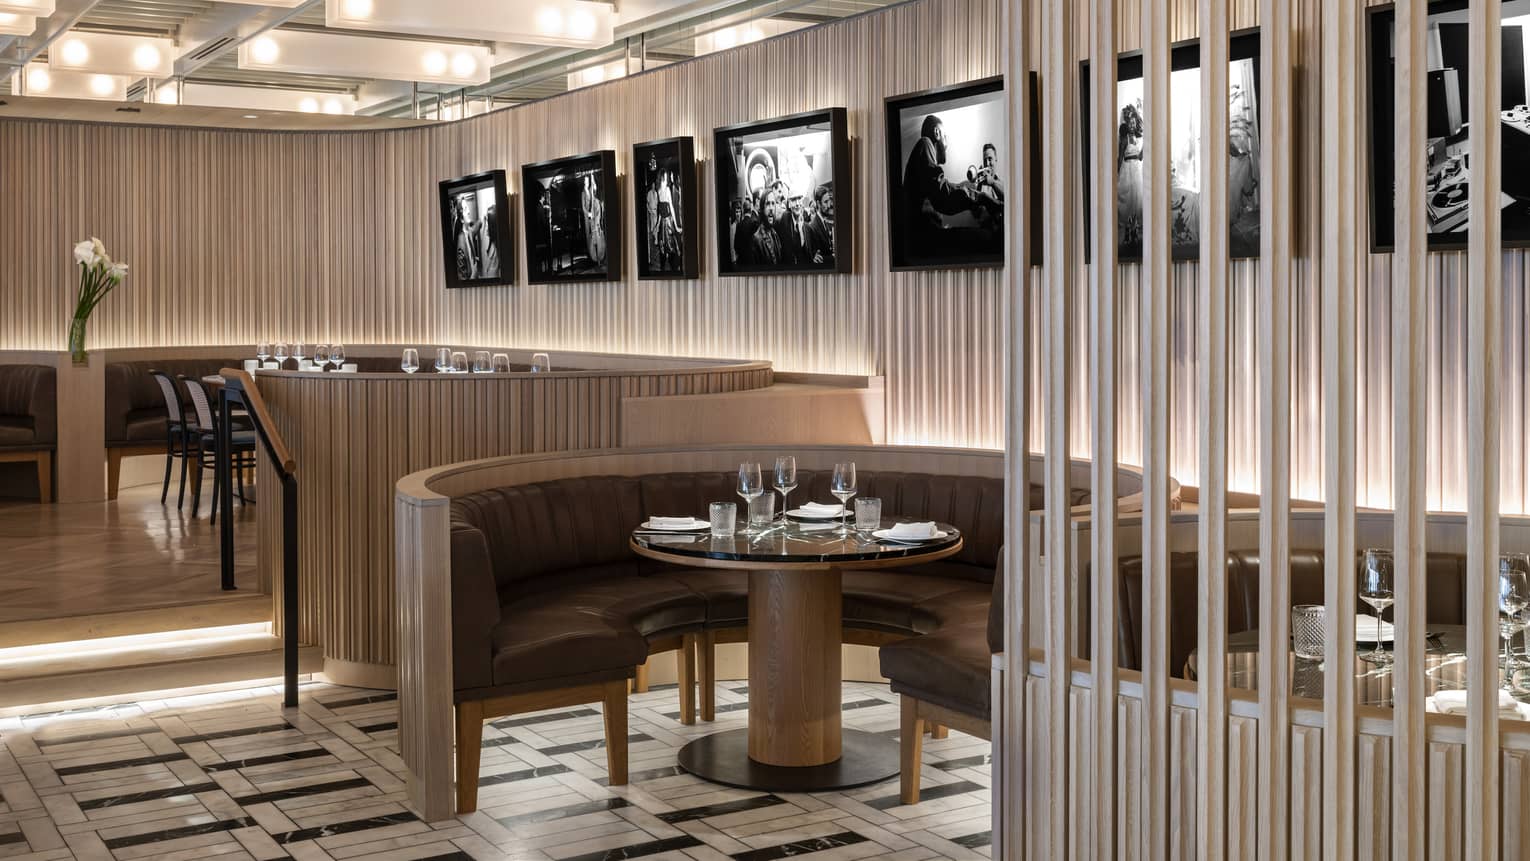 Thin, vertical panels of light-stained wood line the walls and the outside edges of the curved banquet-style tables at MARCUS Restaurant, with black-and-white photography hanging on the walls